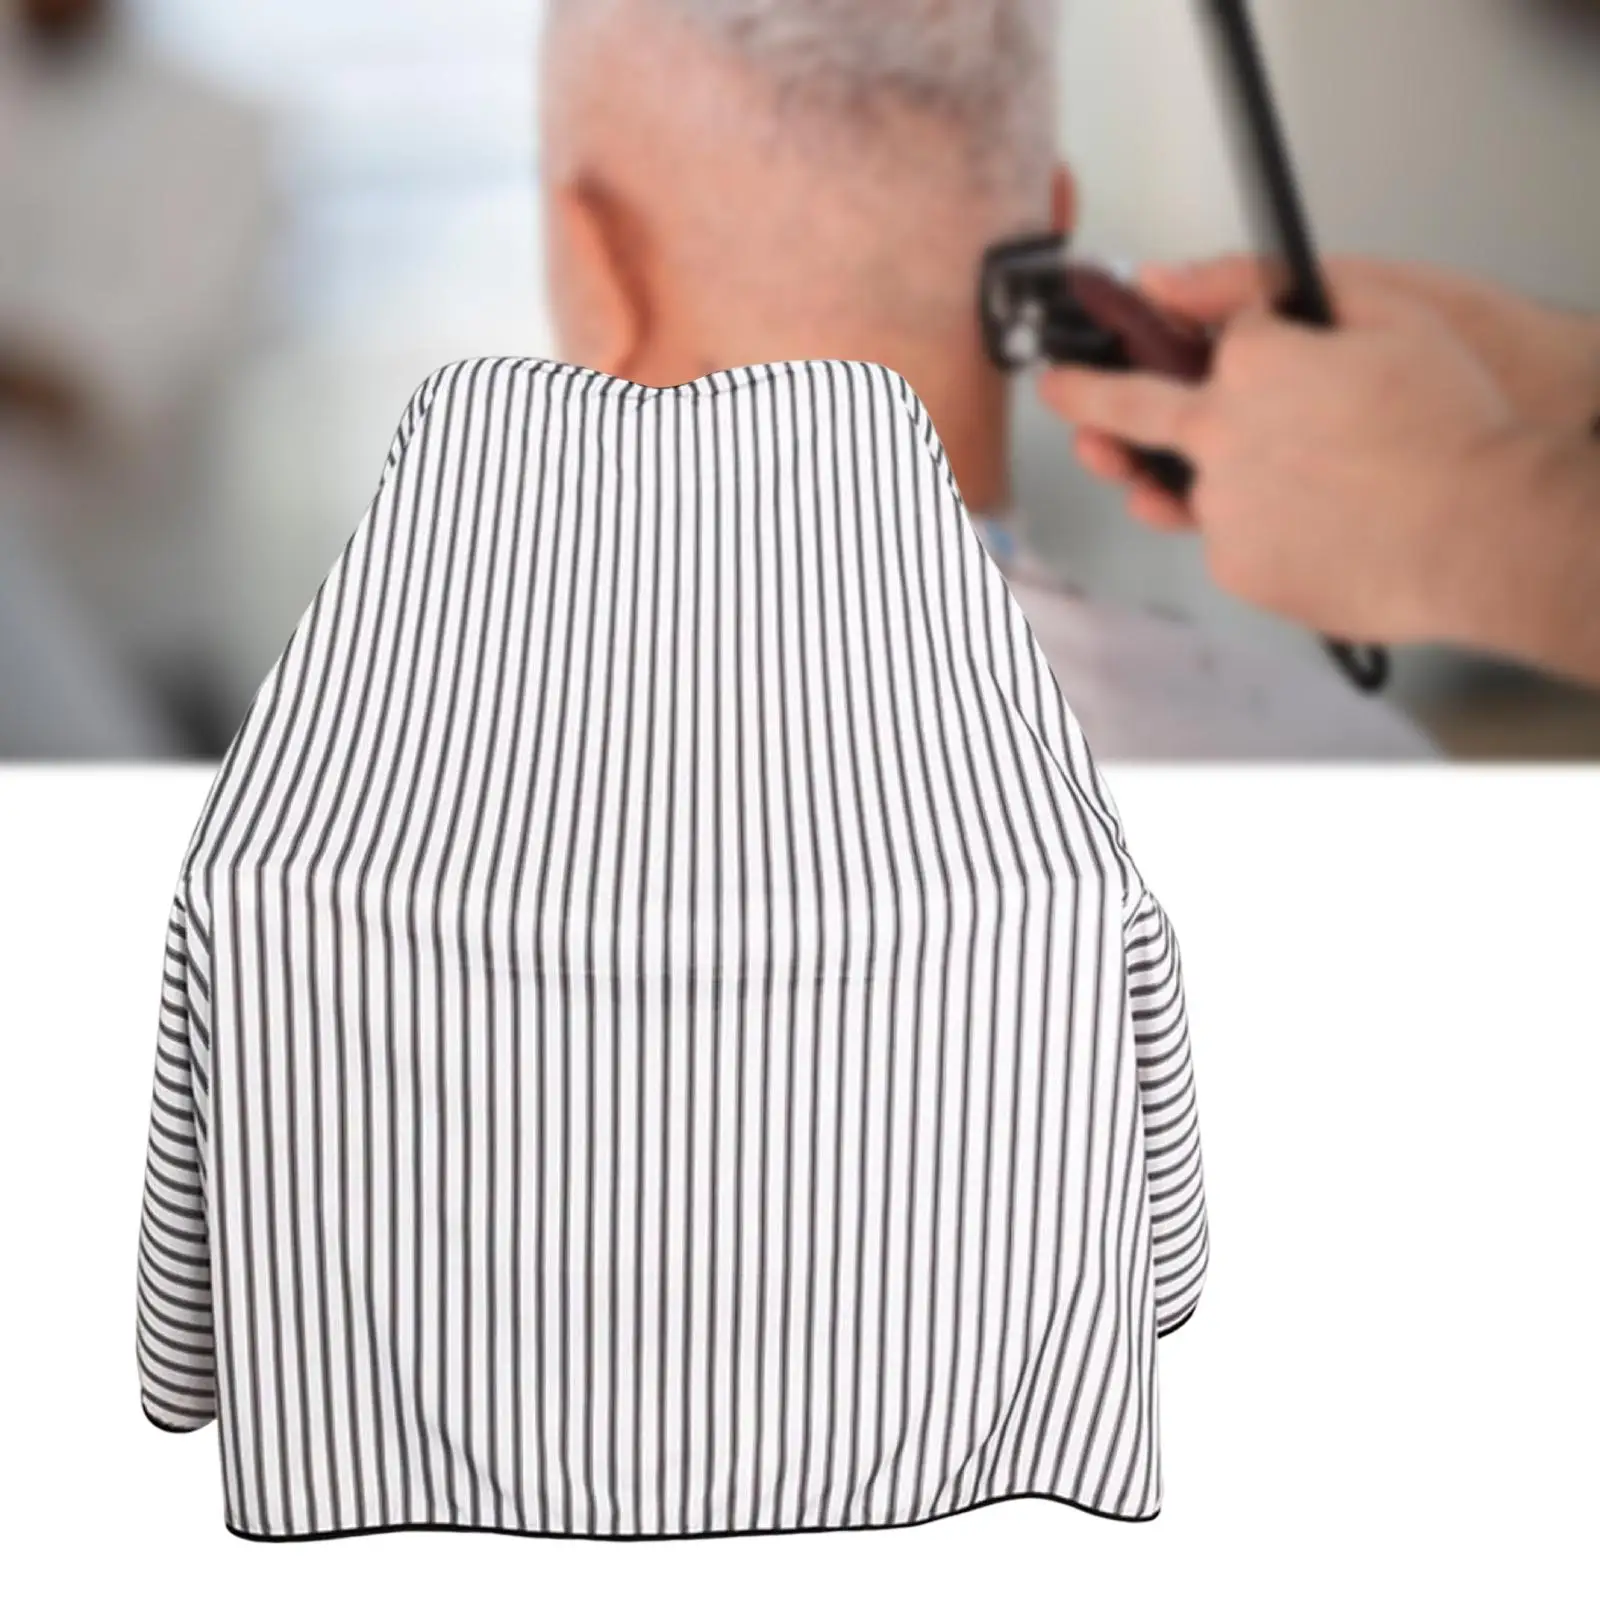 Salon Barber Cape Neck Guard Lightweight Cutting Hair Cape Collar for Hairdressing Straight Hair Perm Coloring Home Haircut